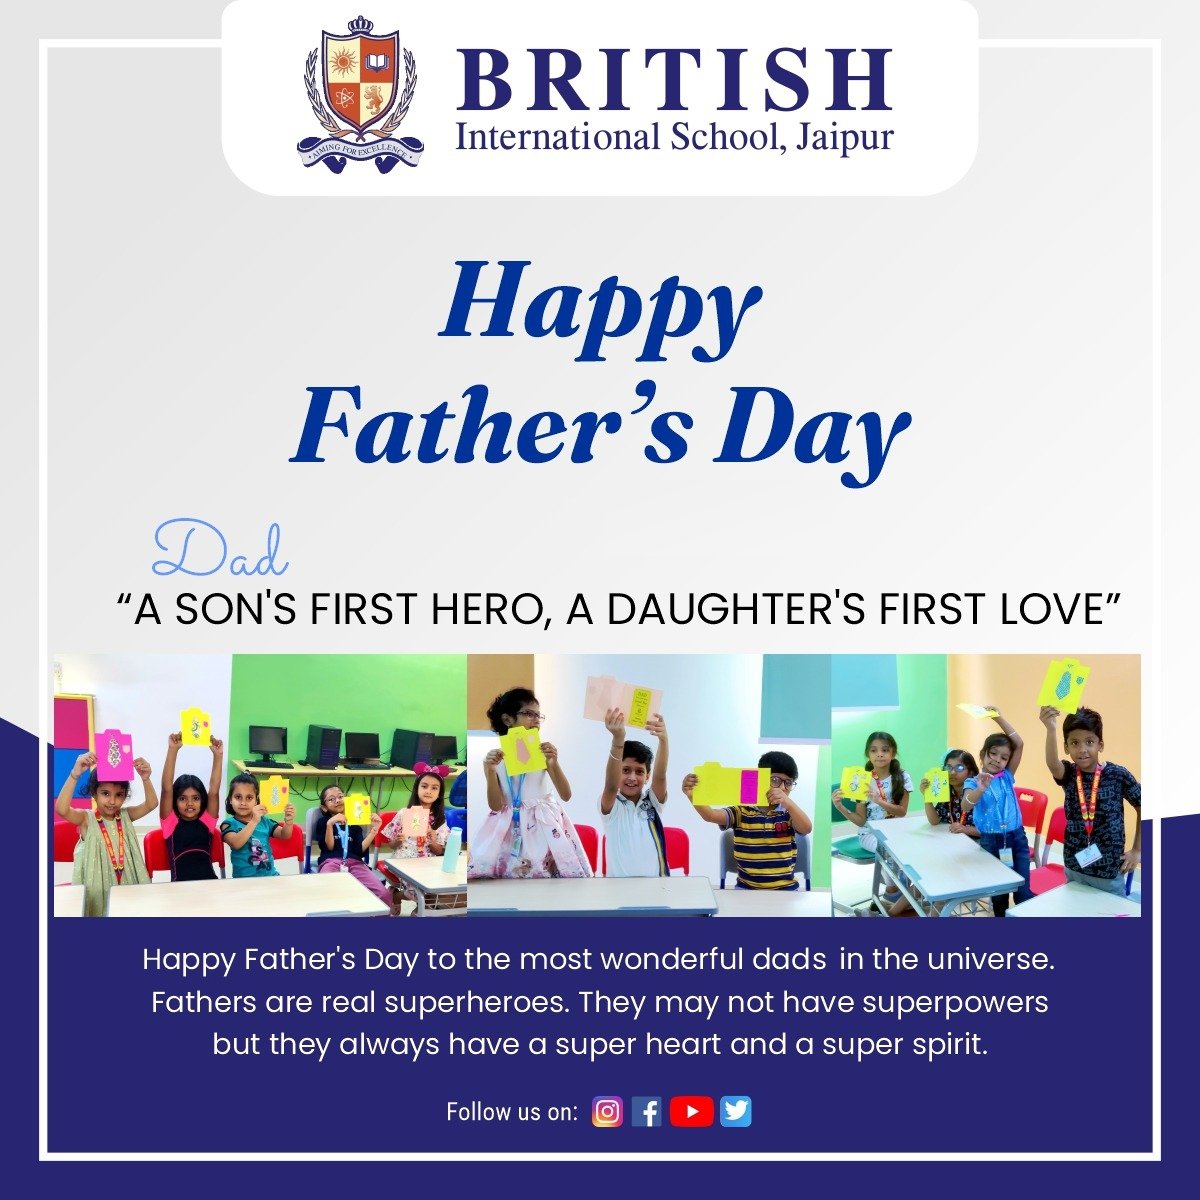 British International School wishes all the extraordinary dads a Happy Father's Day. 

#BIS #BritishInternationalSchool #bestschoolinjaipur #education #HappyFathersDay #FathersDay2023 #RealHeroes #DadLove #FamilyFirst #ProudFather #FatherAndChild  #firstteacher #jaipur #explore